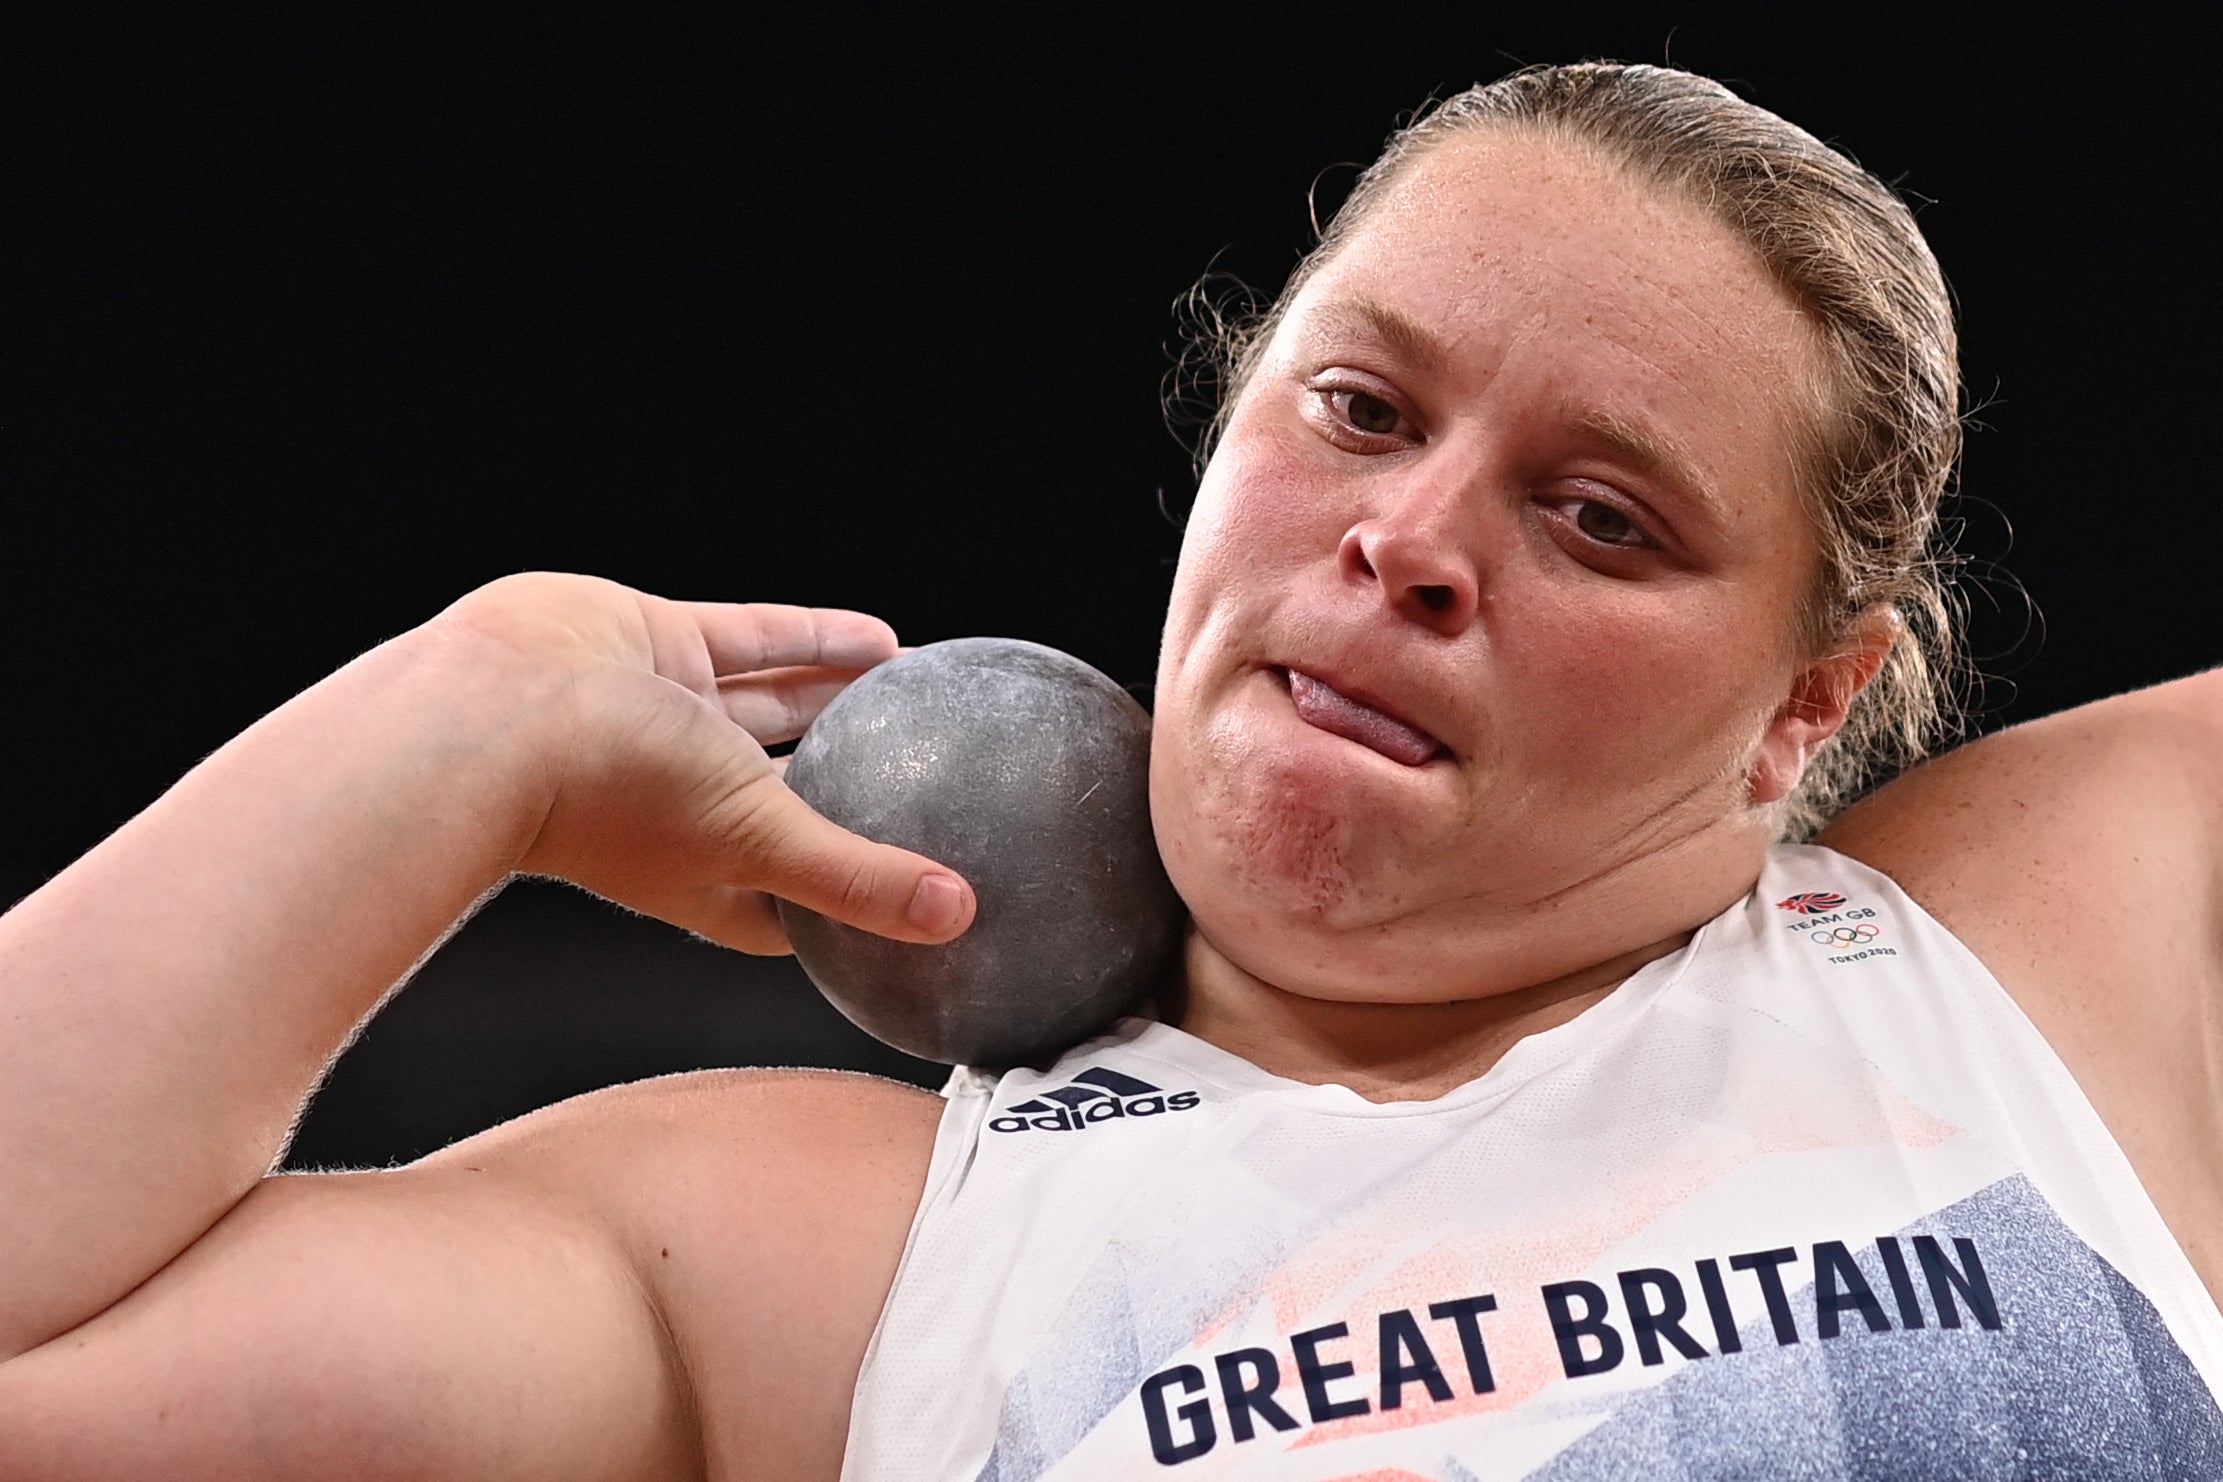 Britain's Sophie McKinna competes in the women's shot put qualification during the Tokyo 2020 Olympic Games at the Olympic Stadium in Tokyo on July 30, 2021